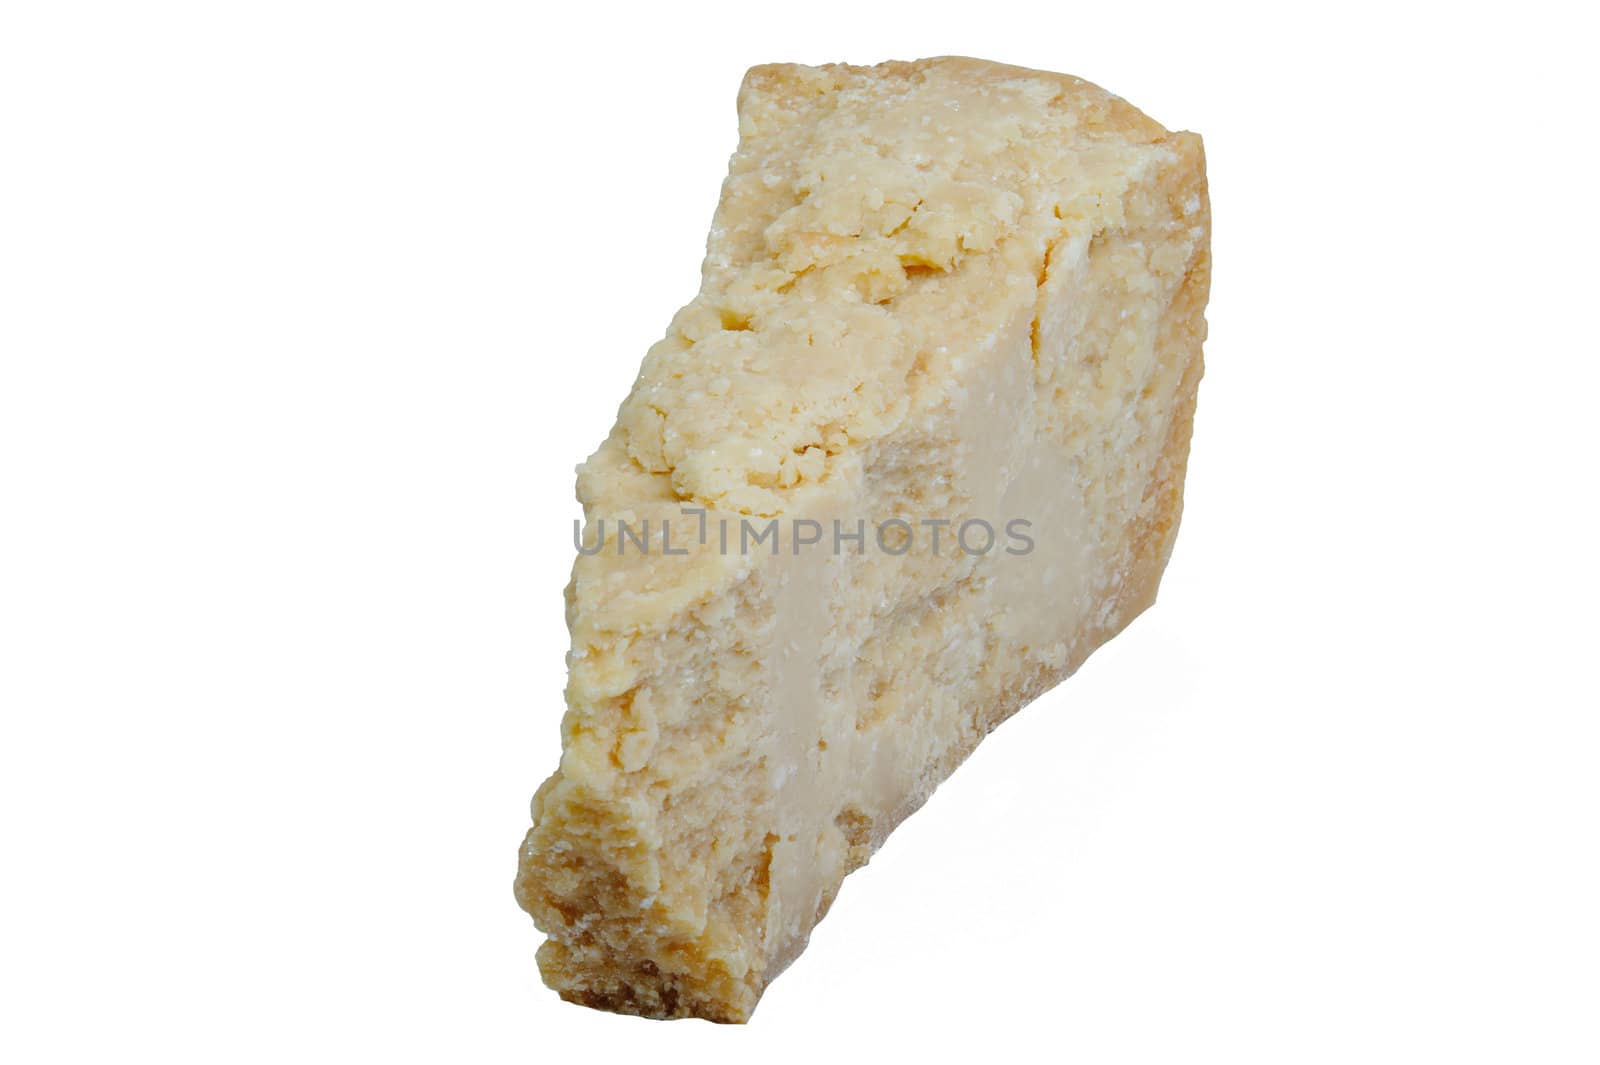 An image of a piece of tasty parmesan